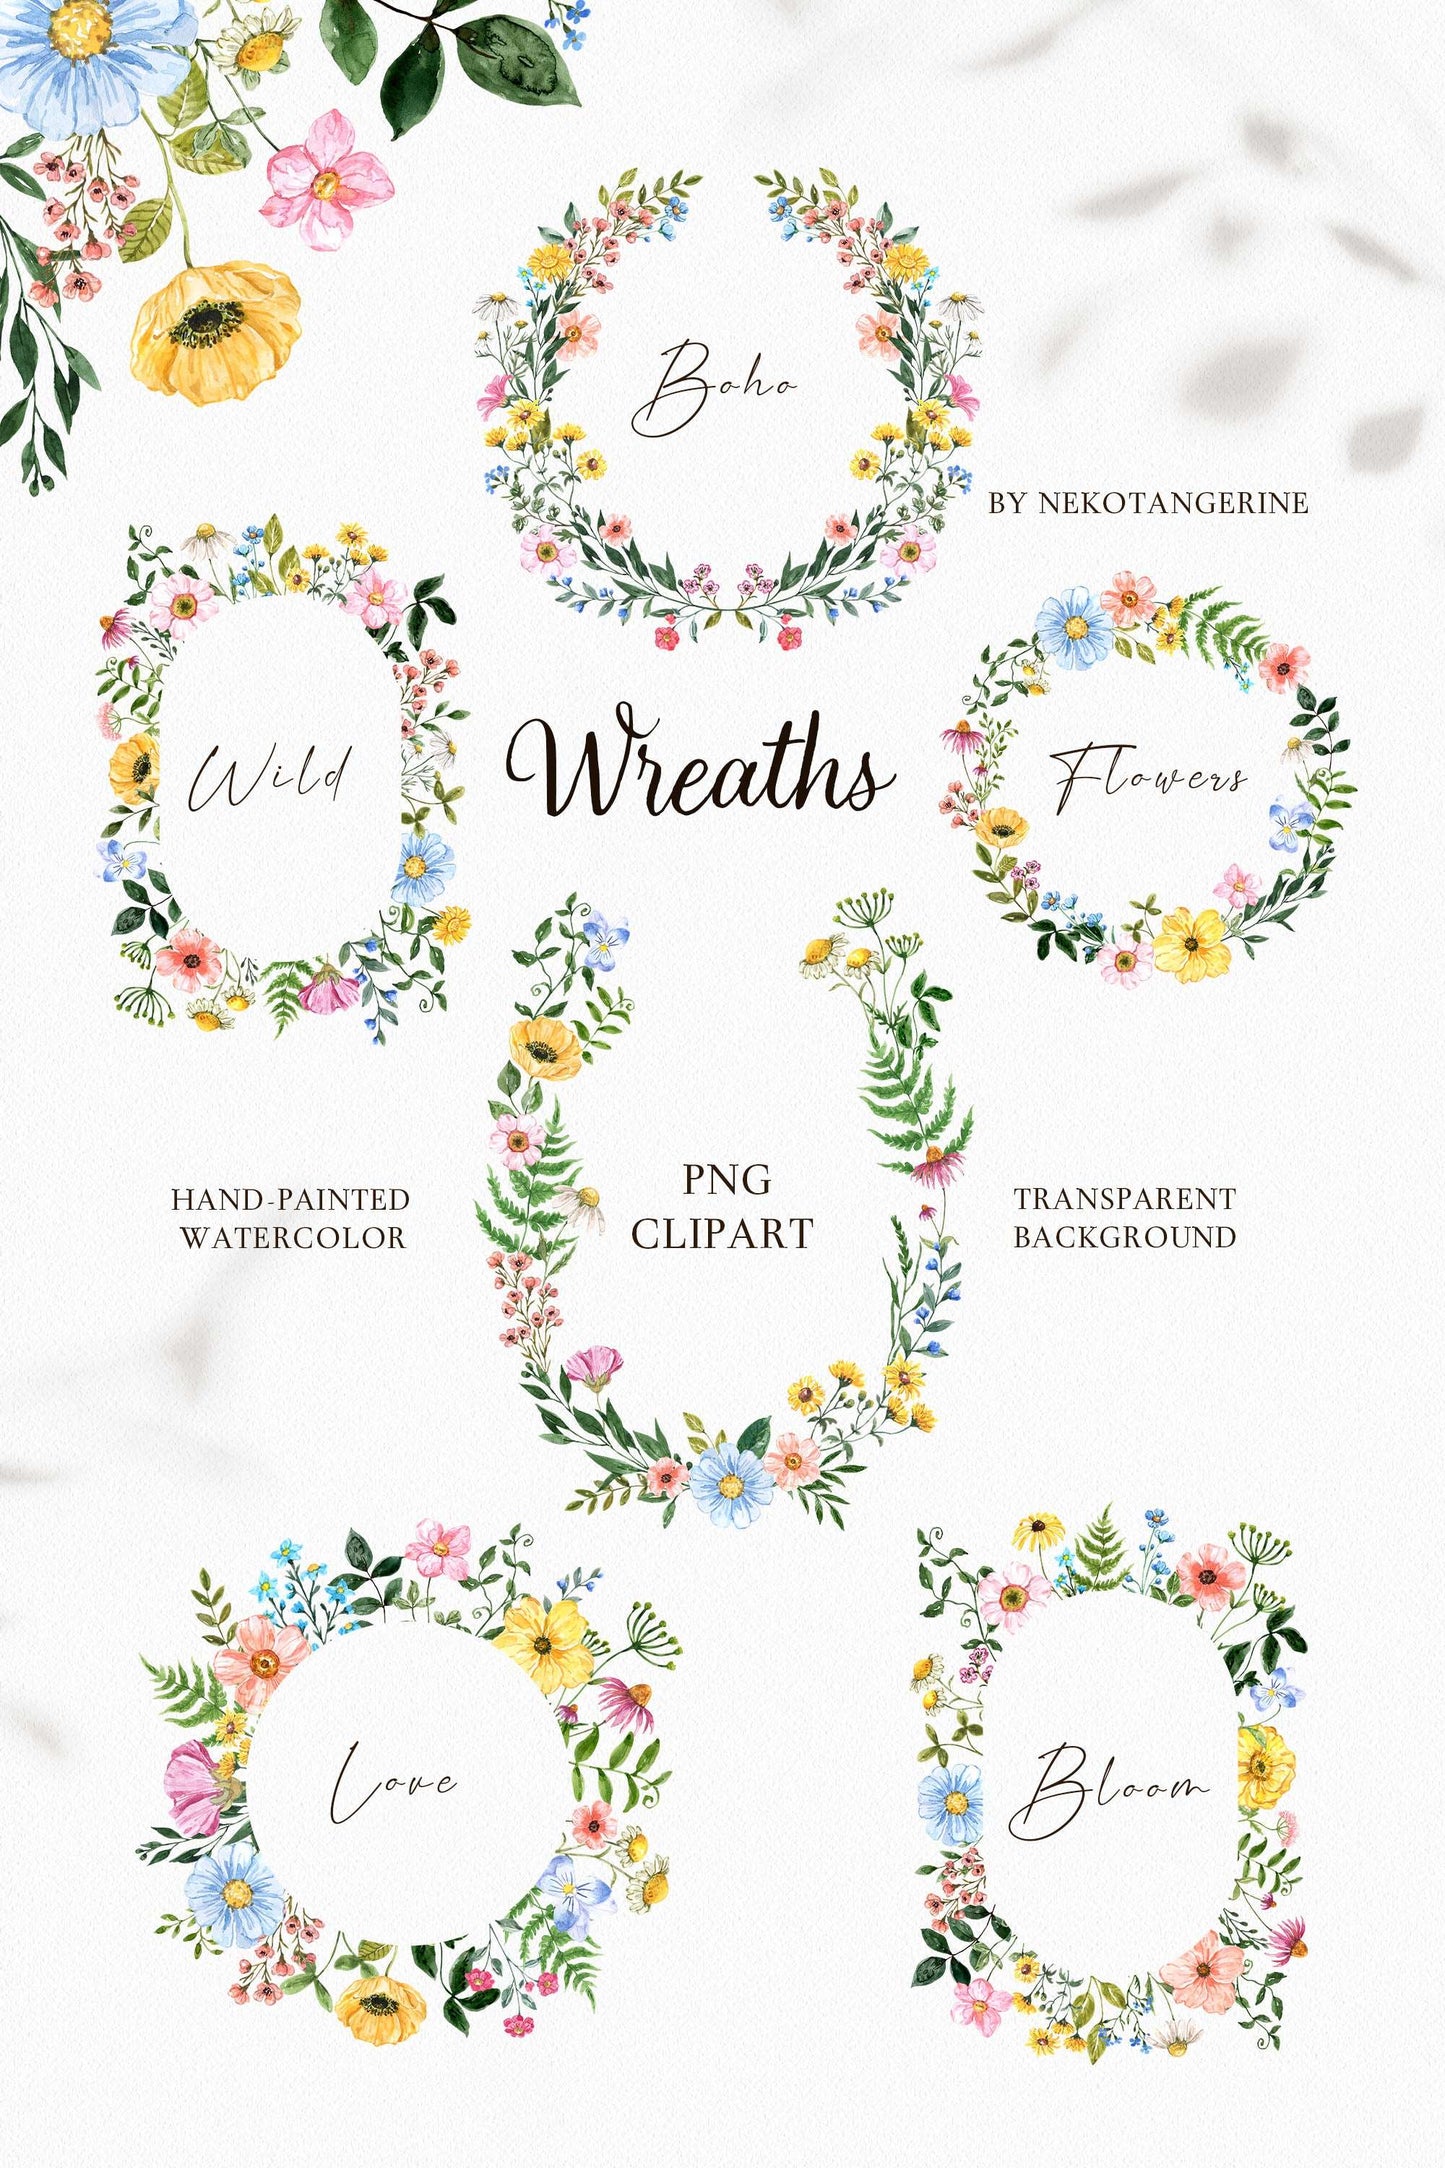 Watercolor Boho Wildflowers Frames and Wreaths clipart, watercolor wildflower clipart, wild flower frame clip art